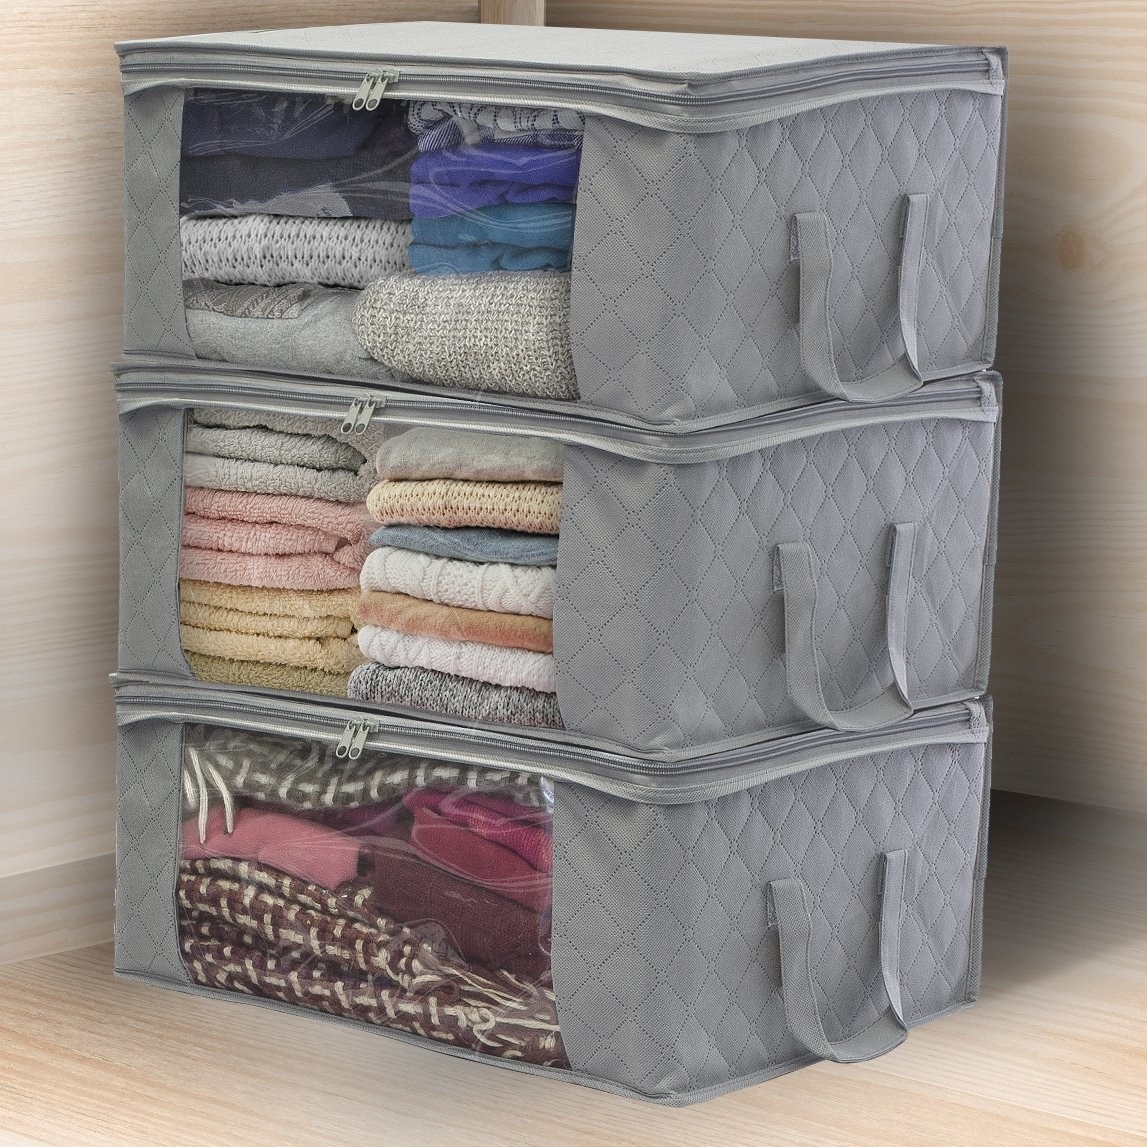 Three grey storage bags with clear panels on the side and handles on the front sitting on top of each other full of blankets and sweaters